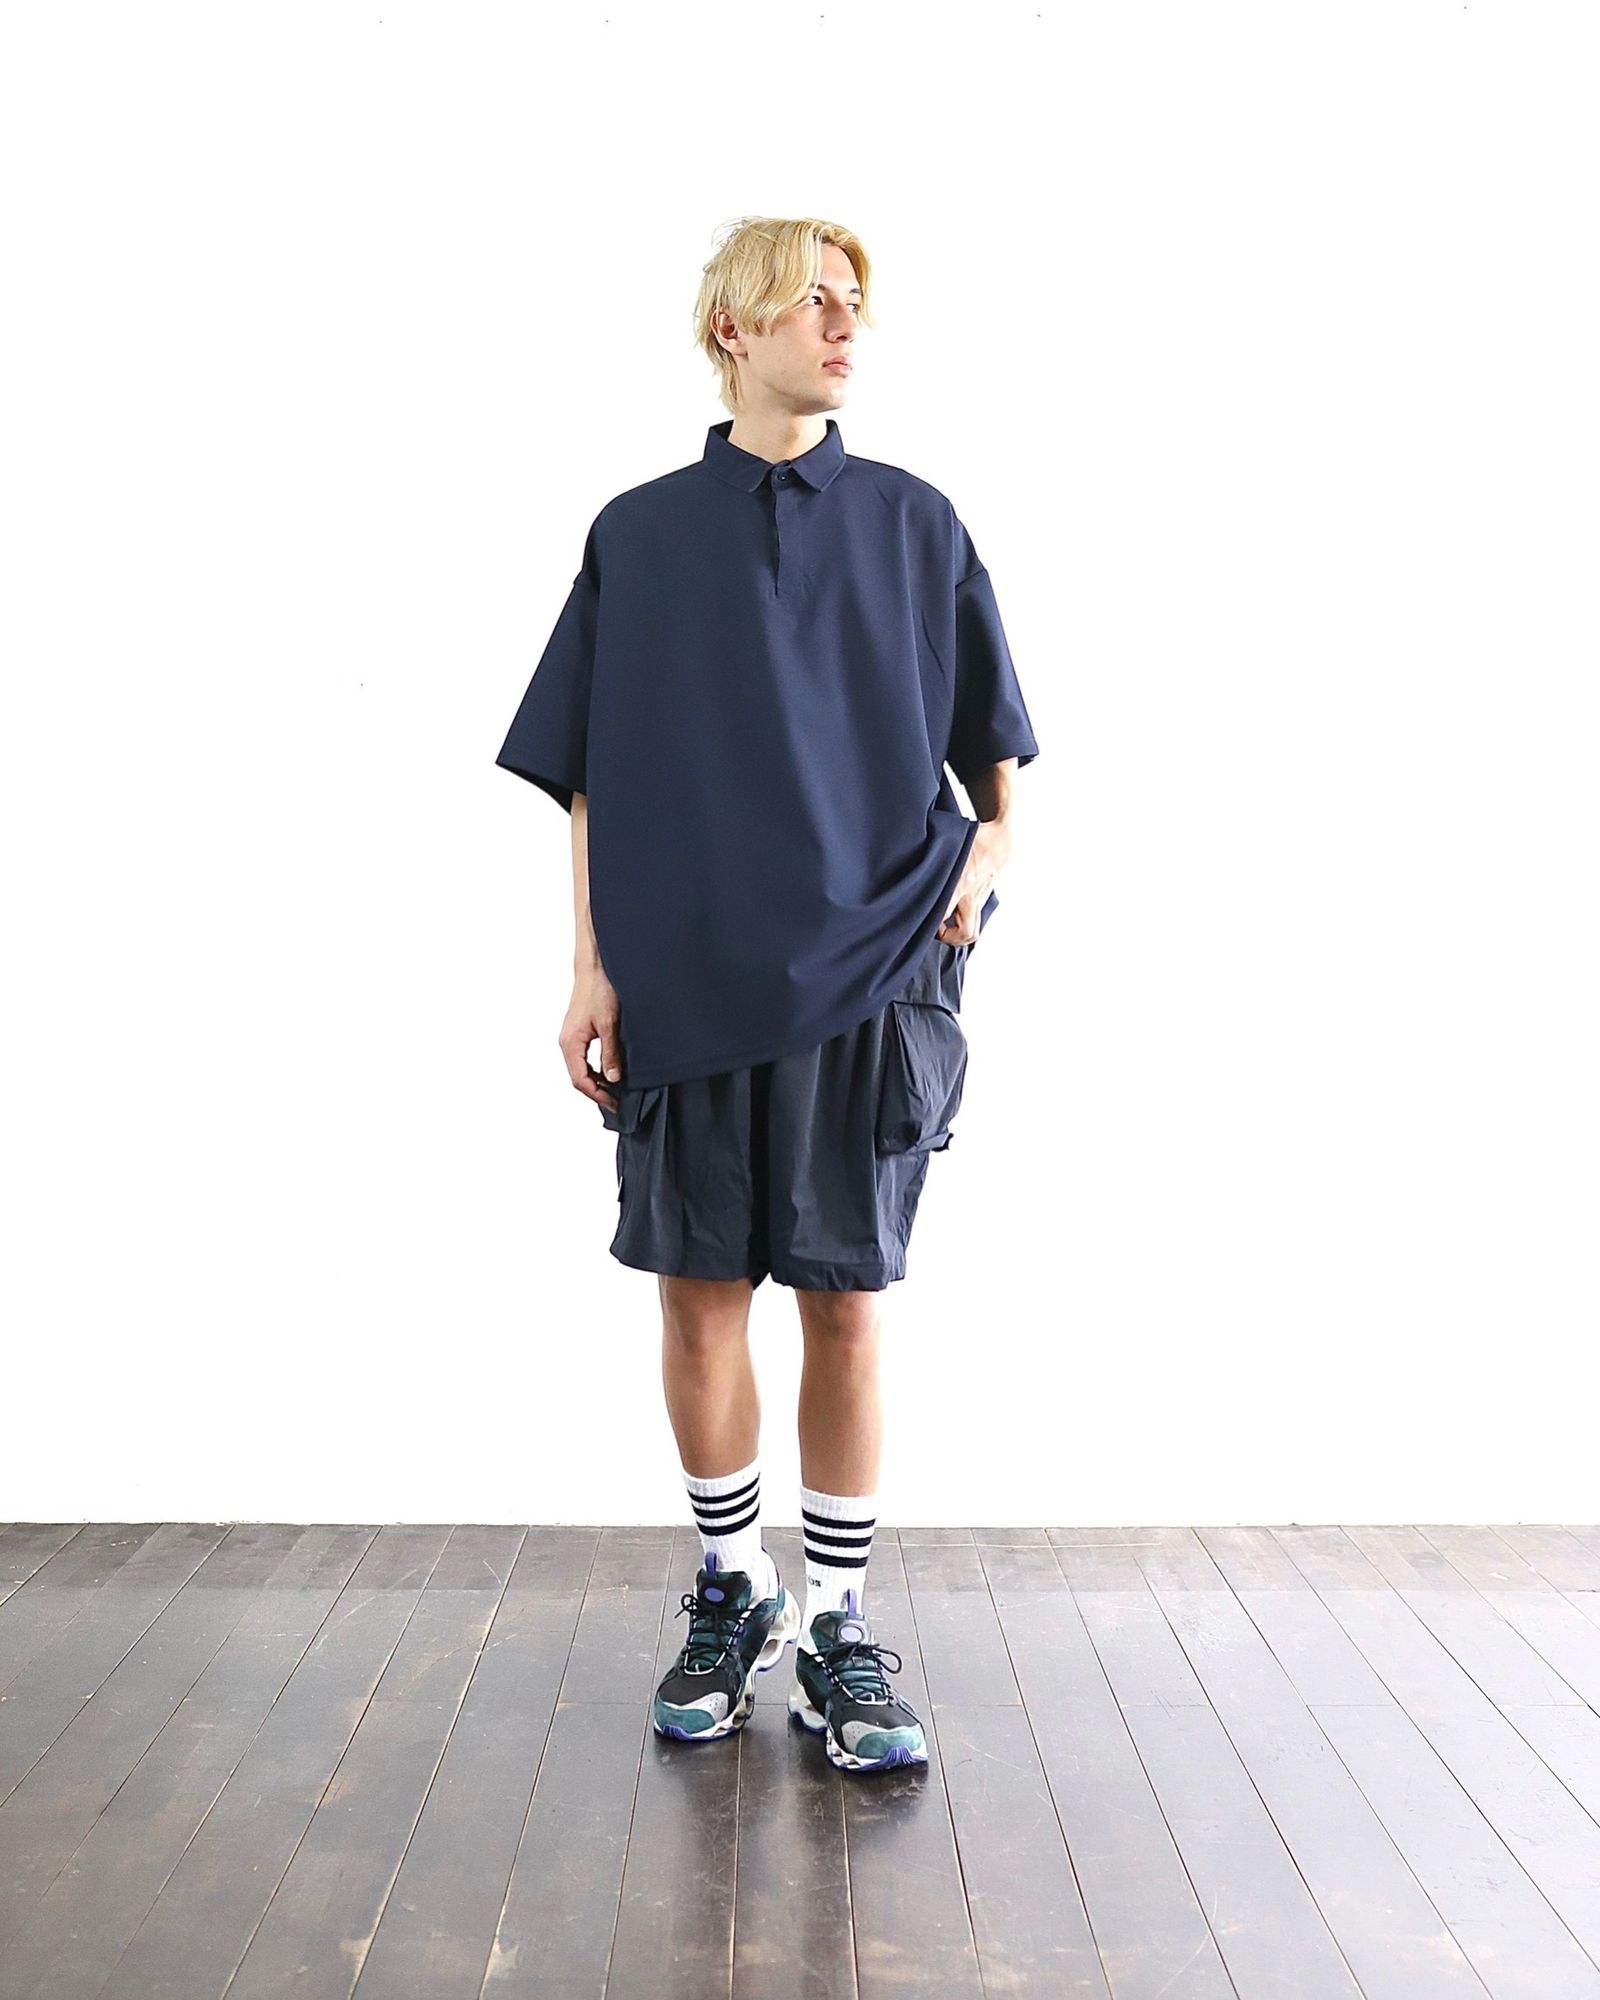 S.F.C-Stripes For Creative 24SS 新作BIG RUGGER SHIRT style 2024.3